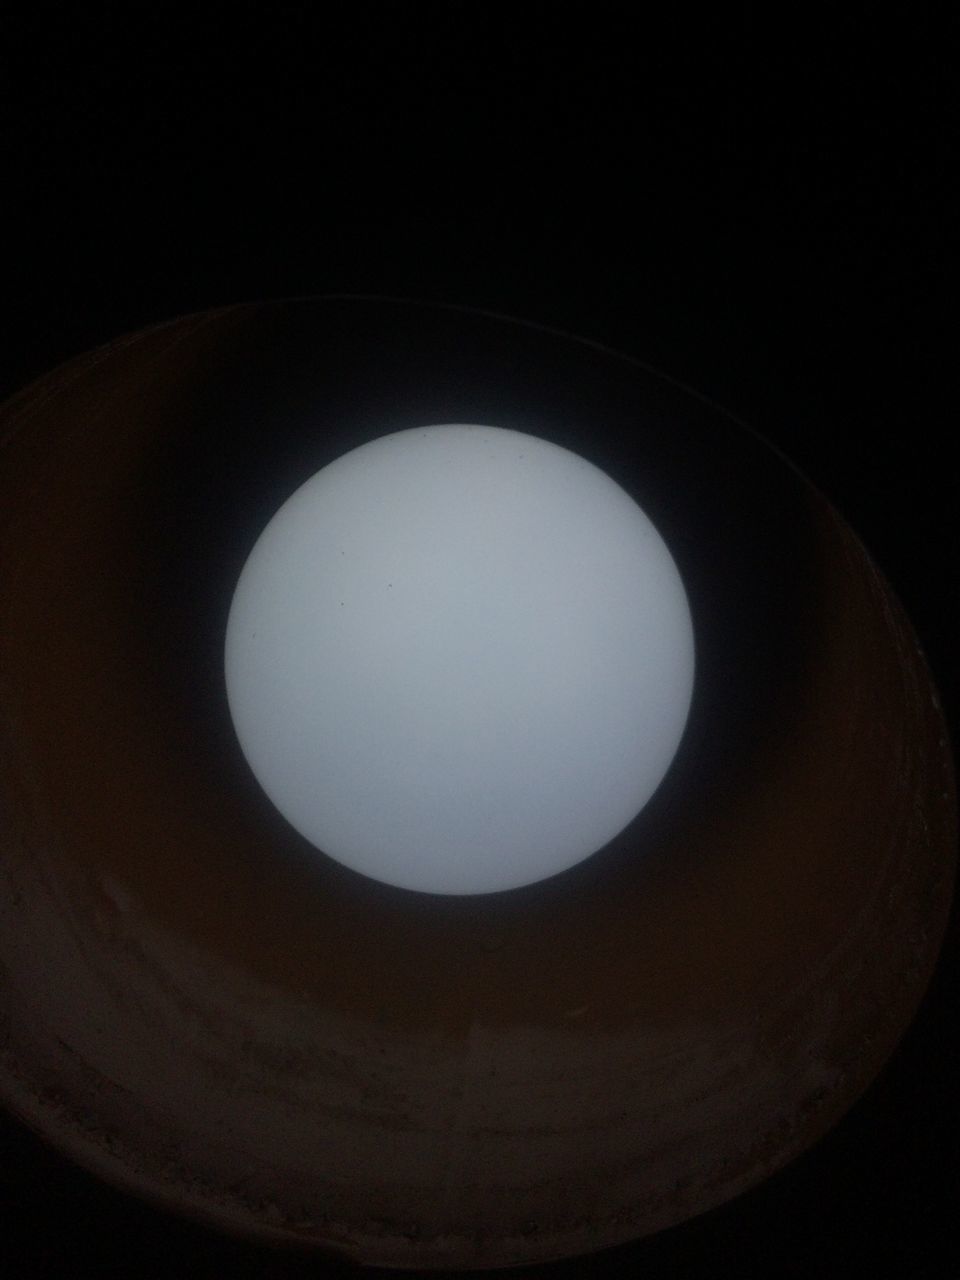 LOW ANGLE VIEW OF ILLUMINATED LAMP